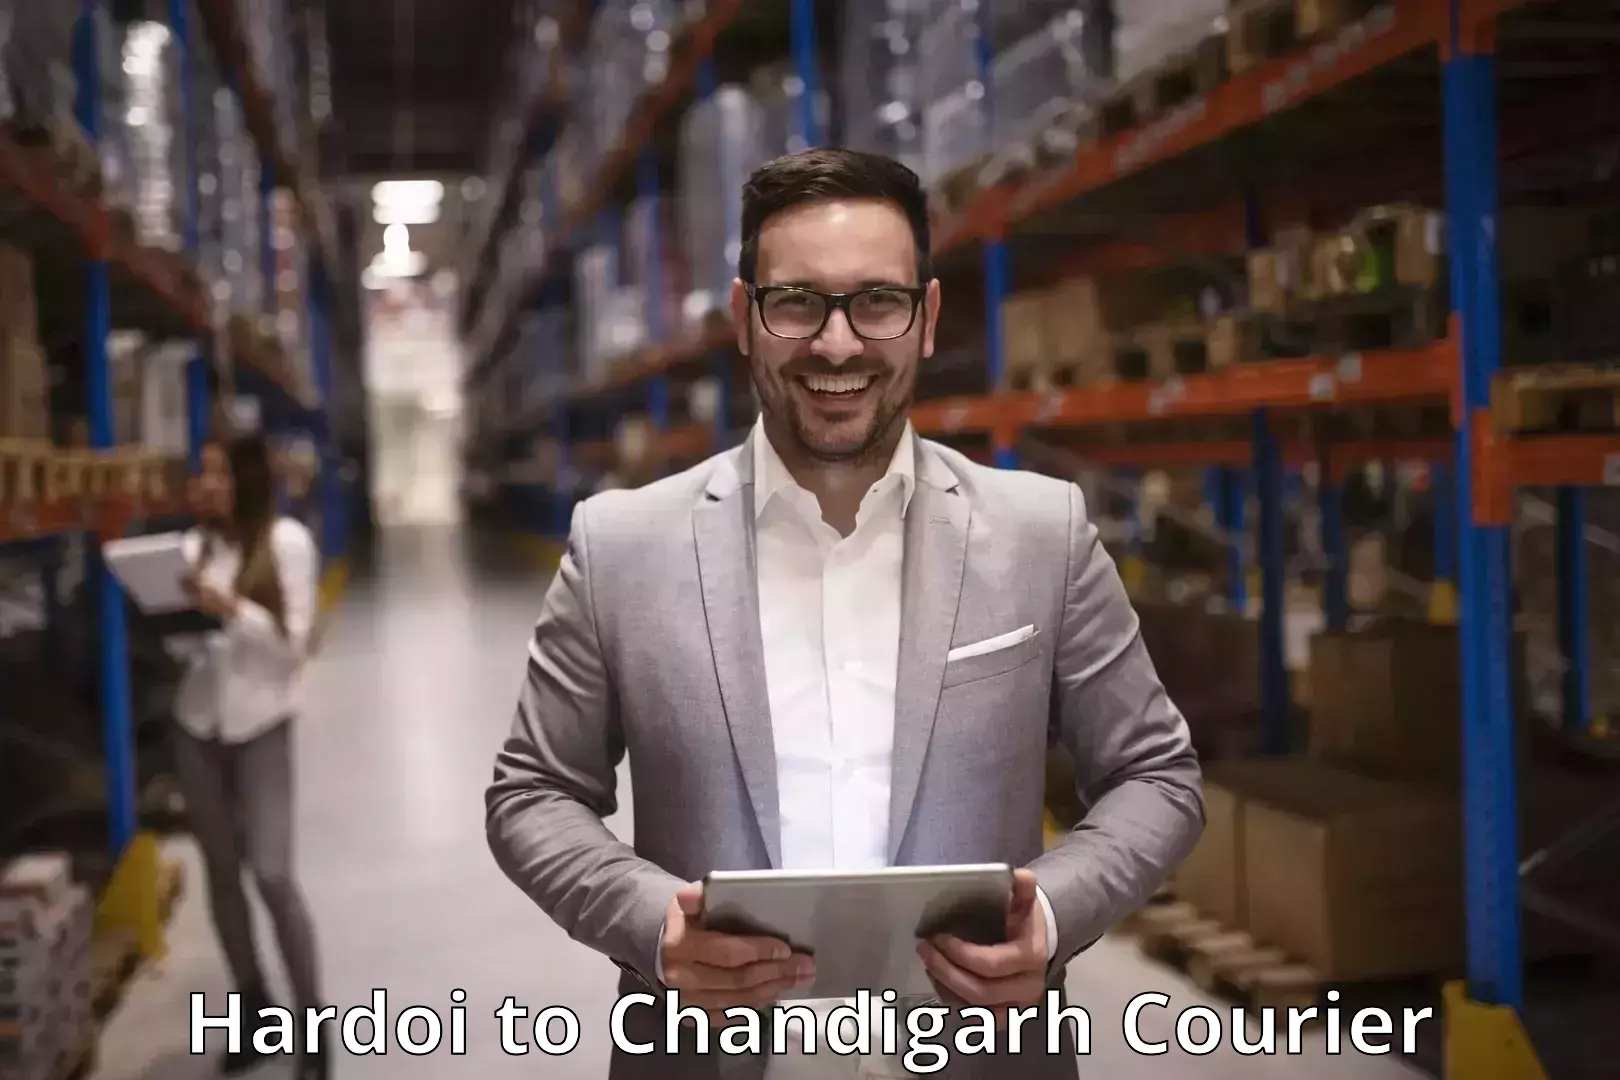 Nationwide delivery network Hardoi to Chandigarh